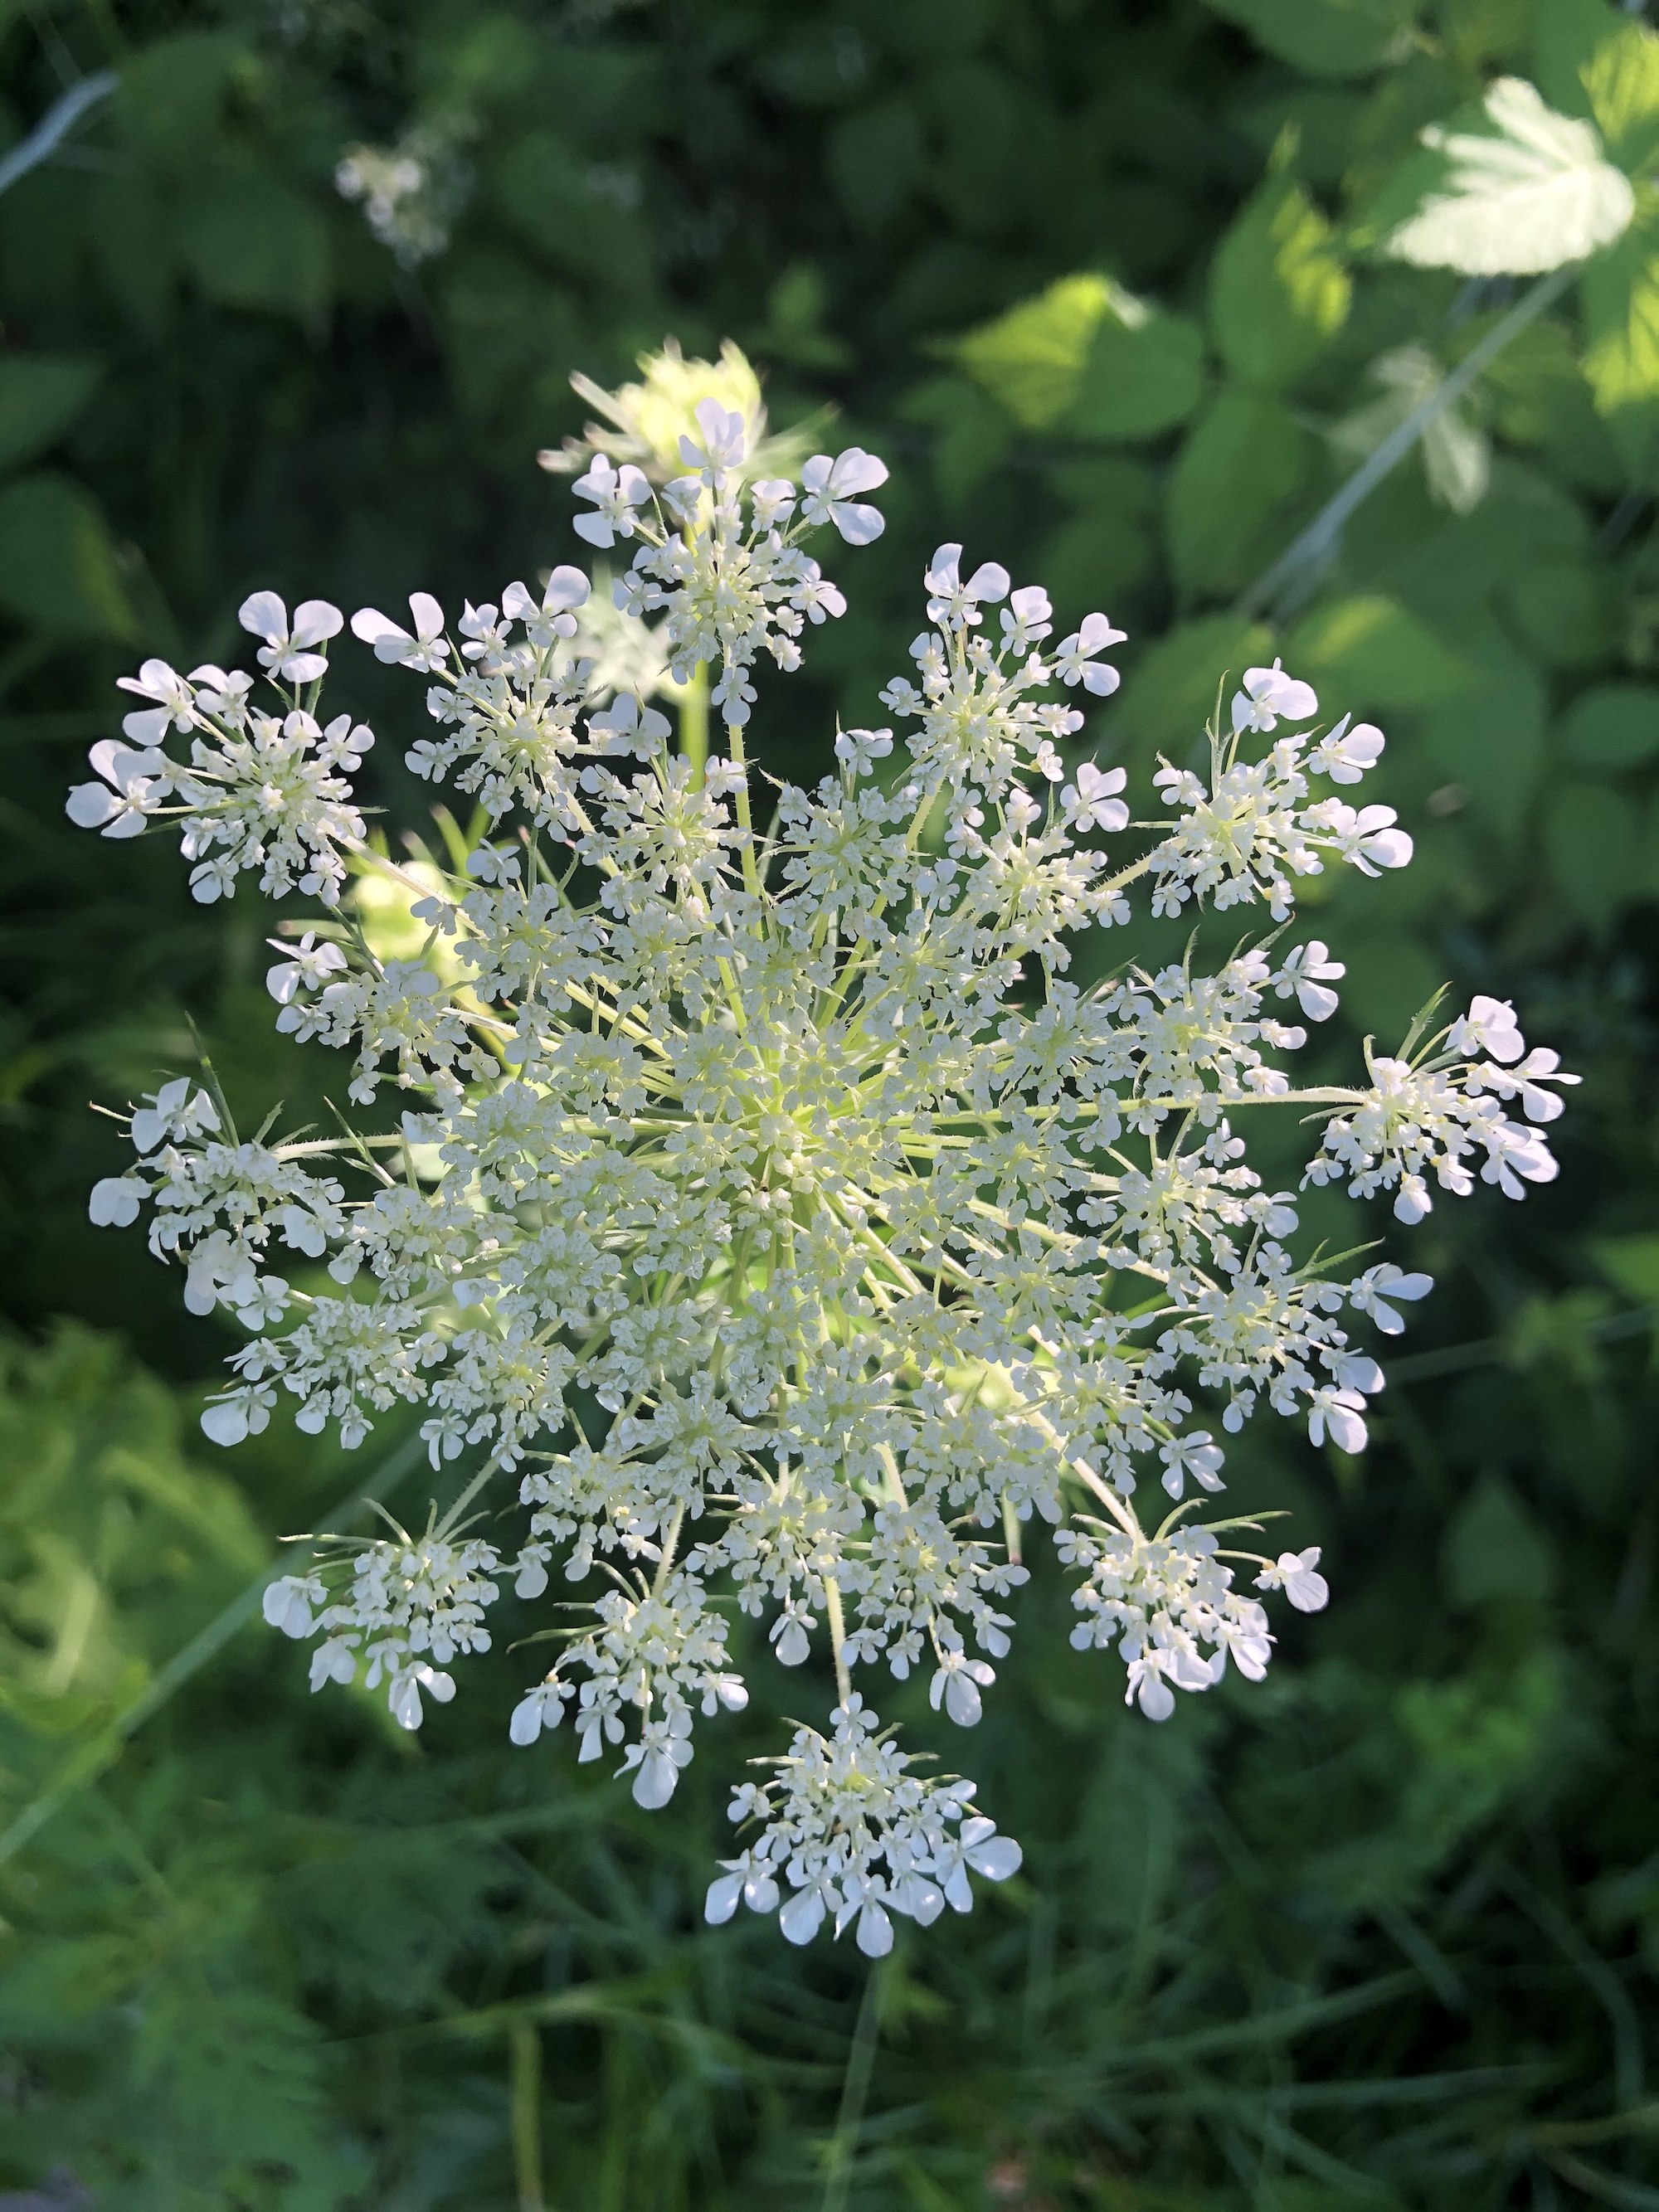 Queen Anne's Lace on bank of retaining pond on the corner of Nakoma Road and Manitou Way on July 17, 2020.